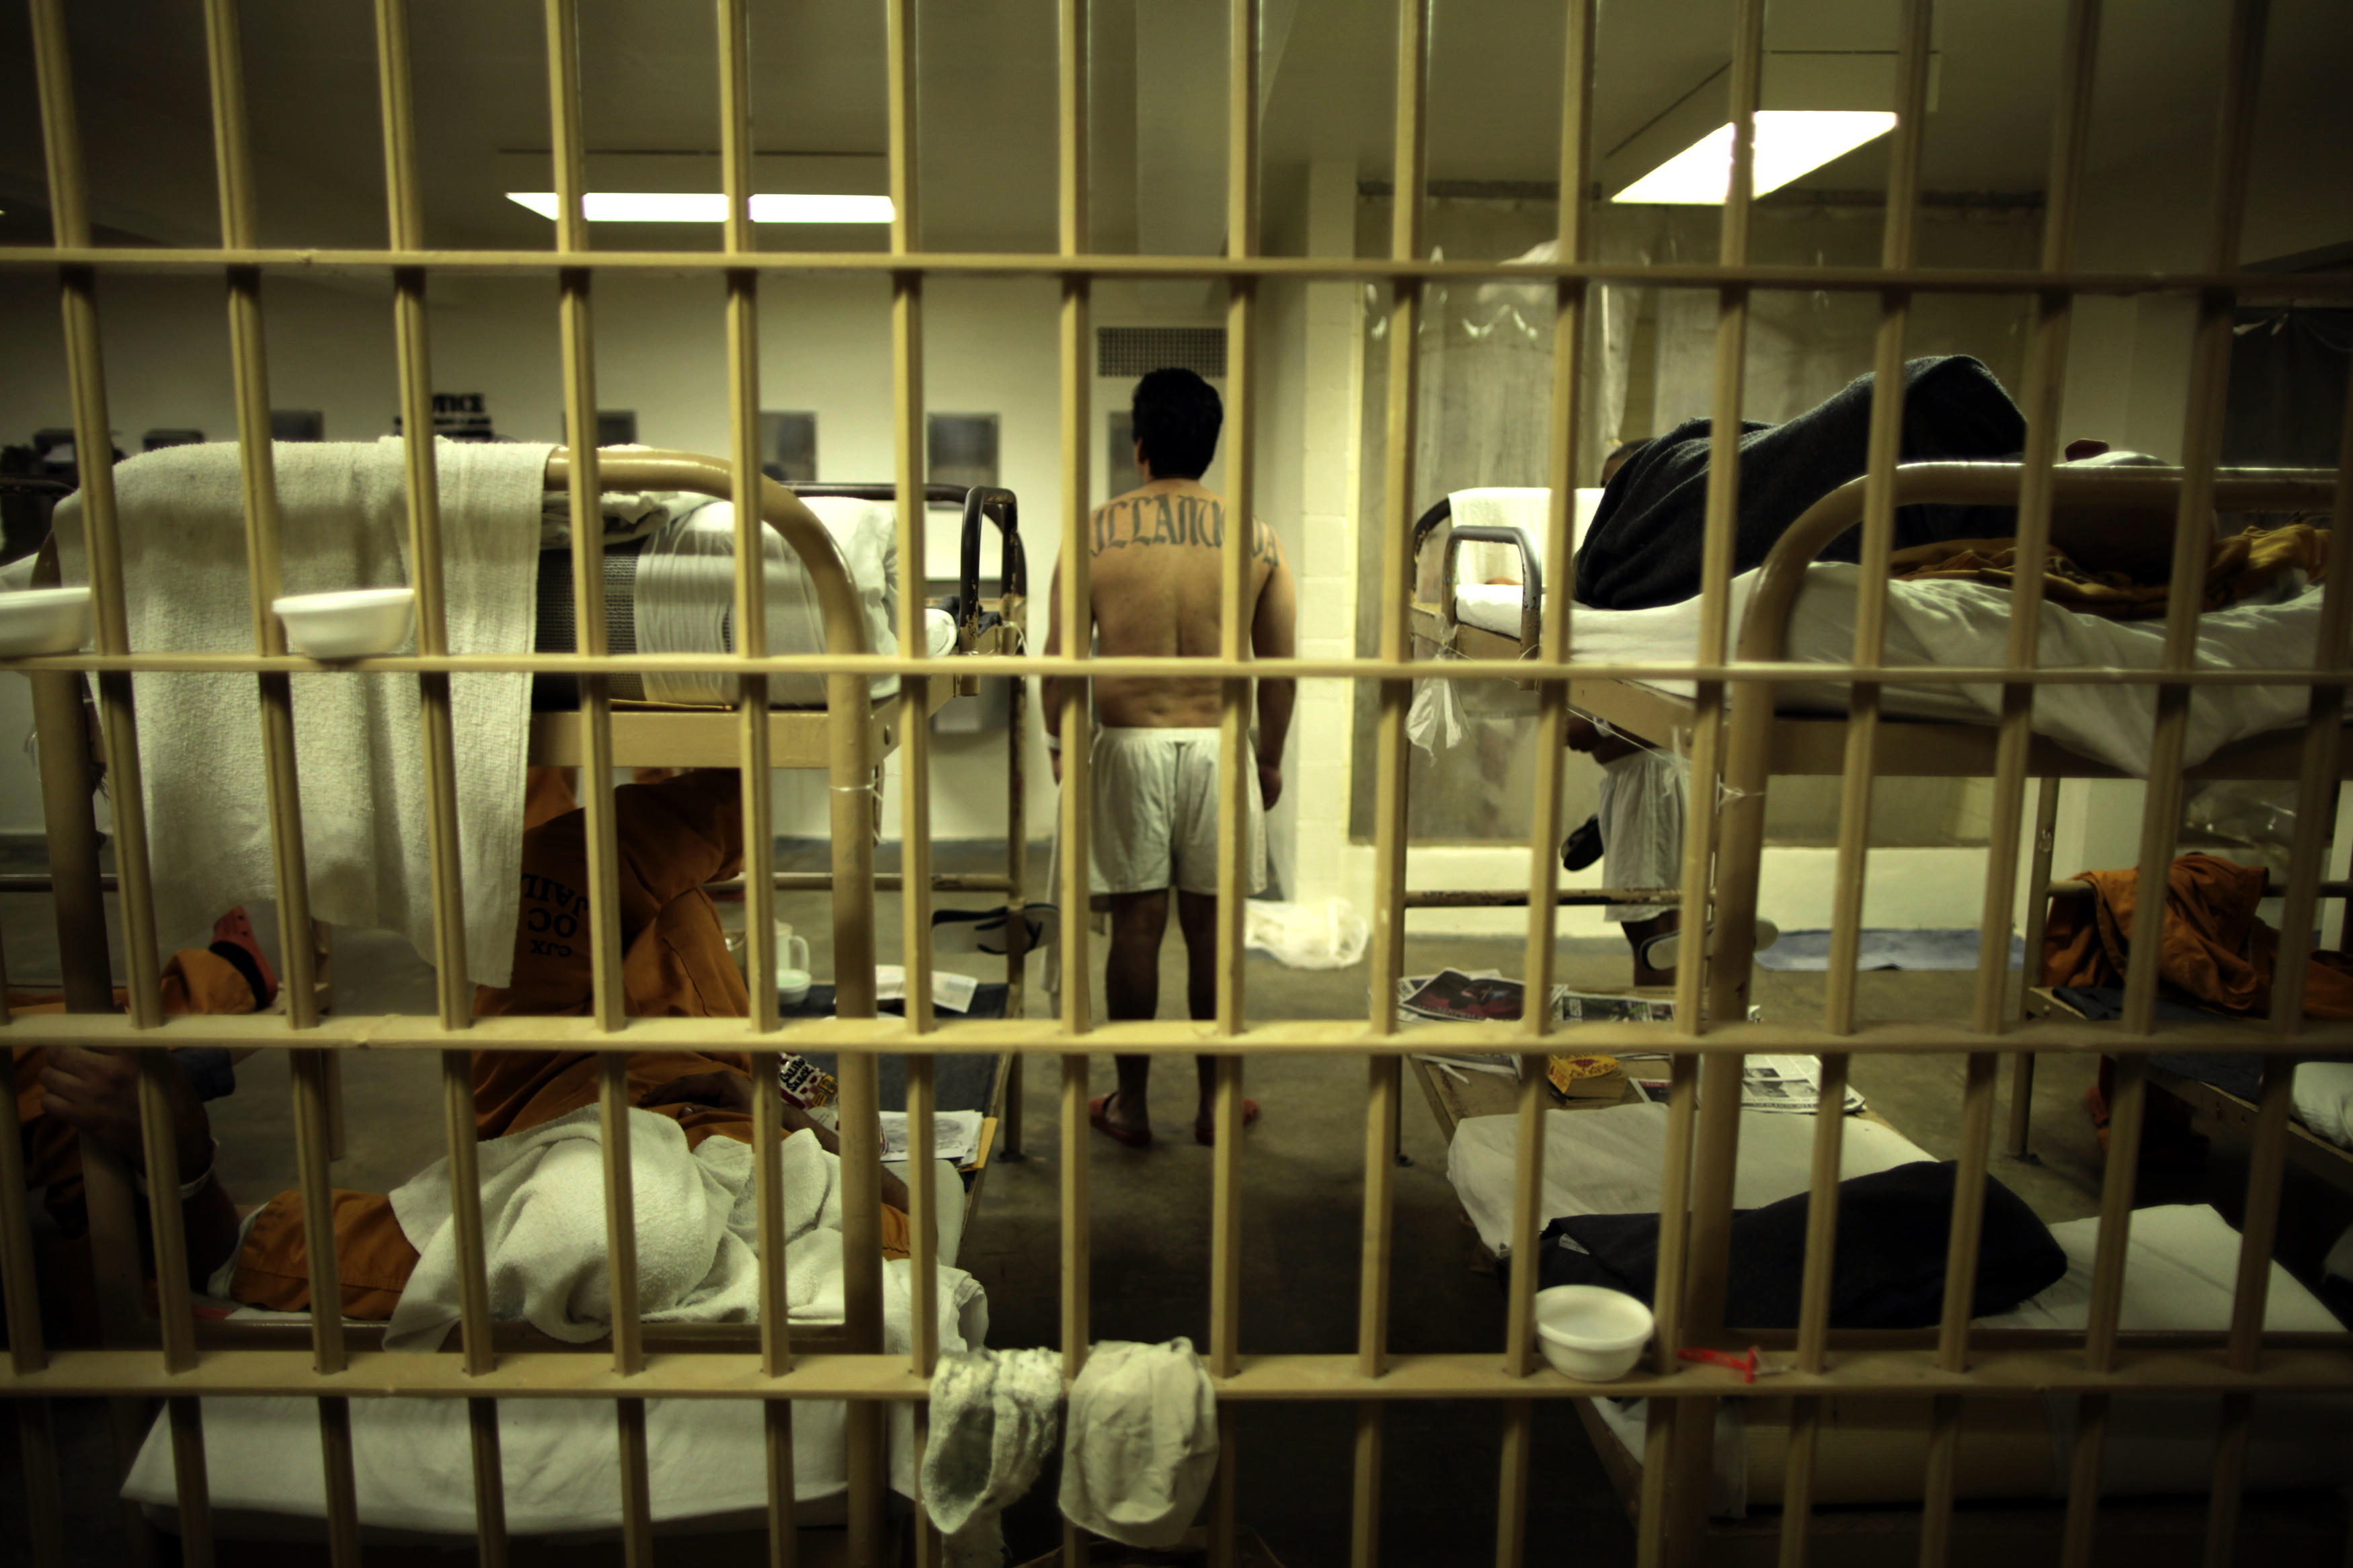 An inmate stands in his cell at the Orange County jail in Santa Ana